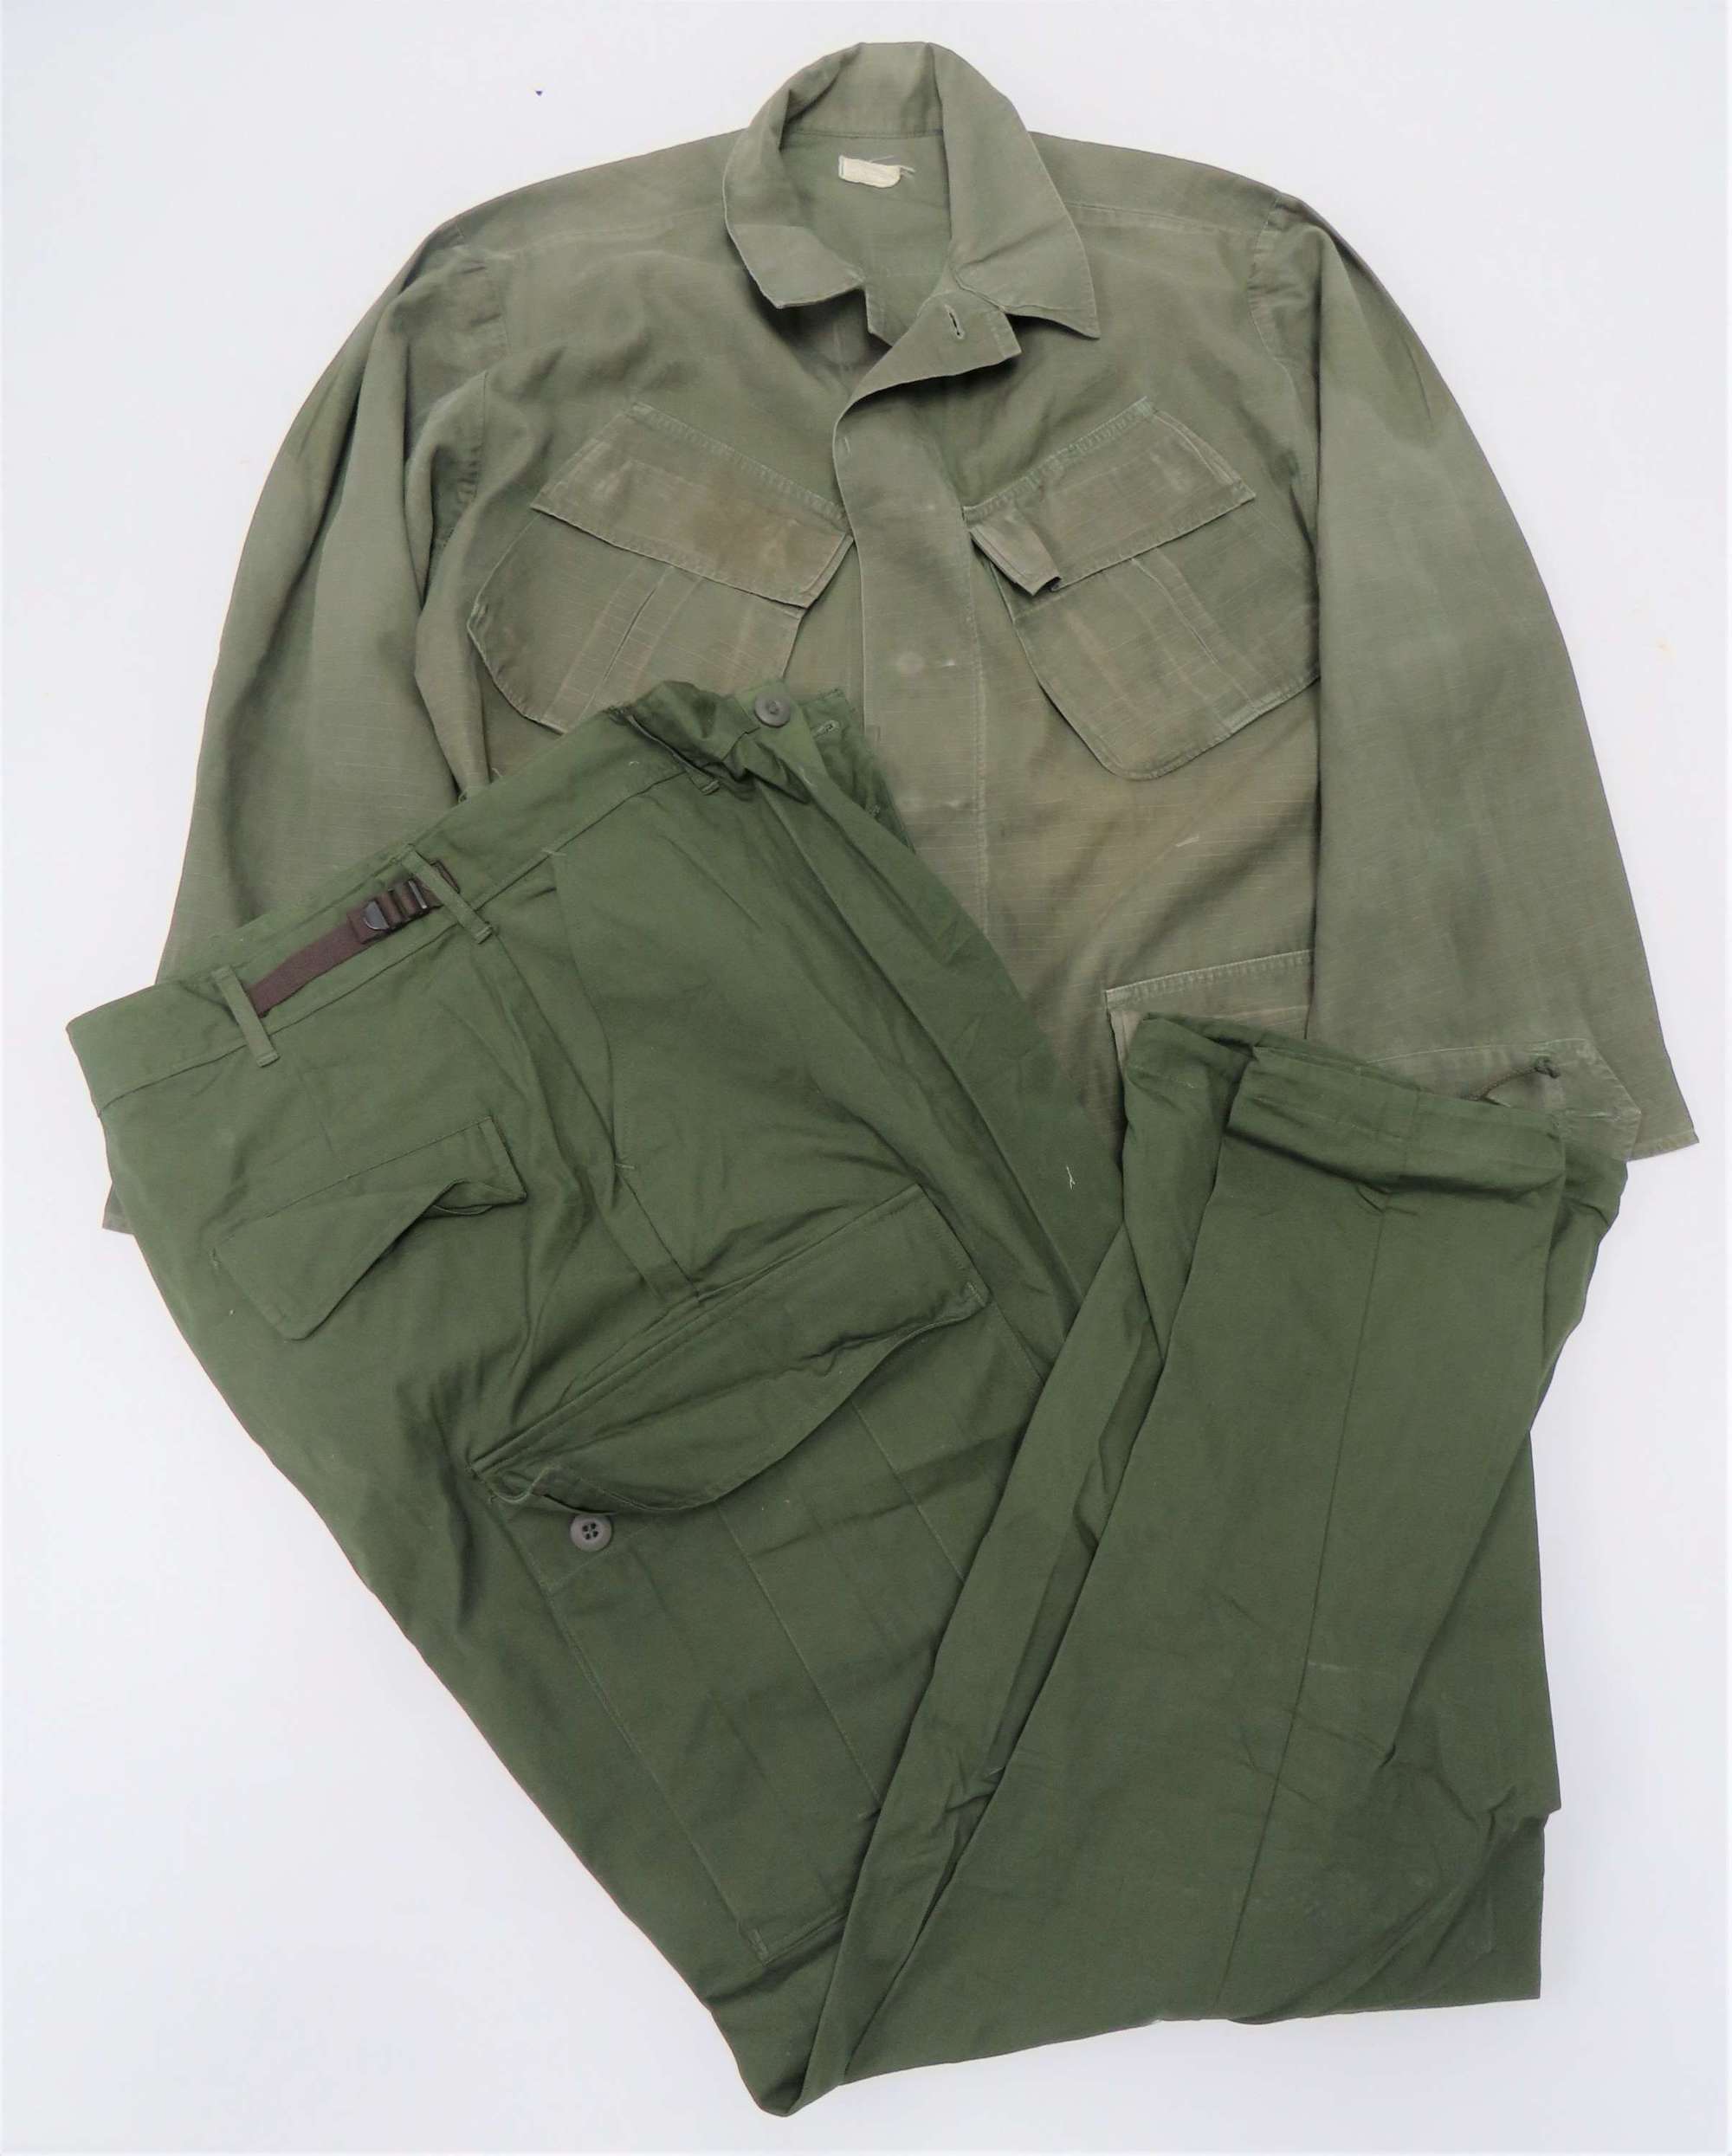 Post War American Tropical Combat Jacket and Trousers